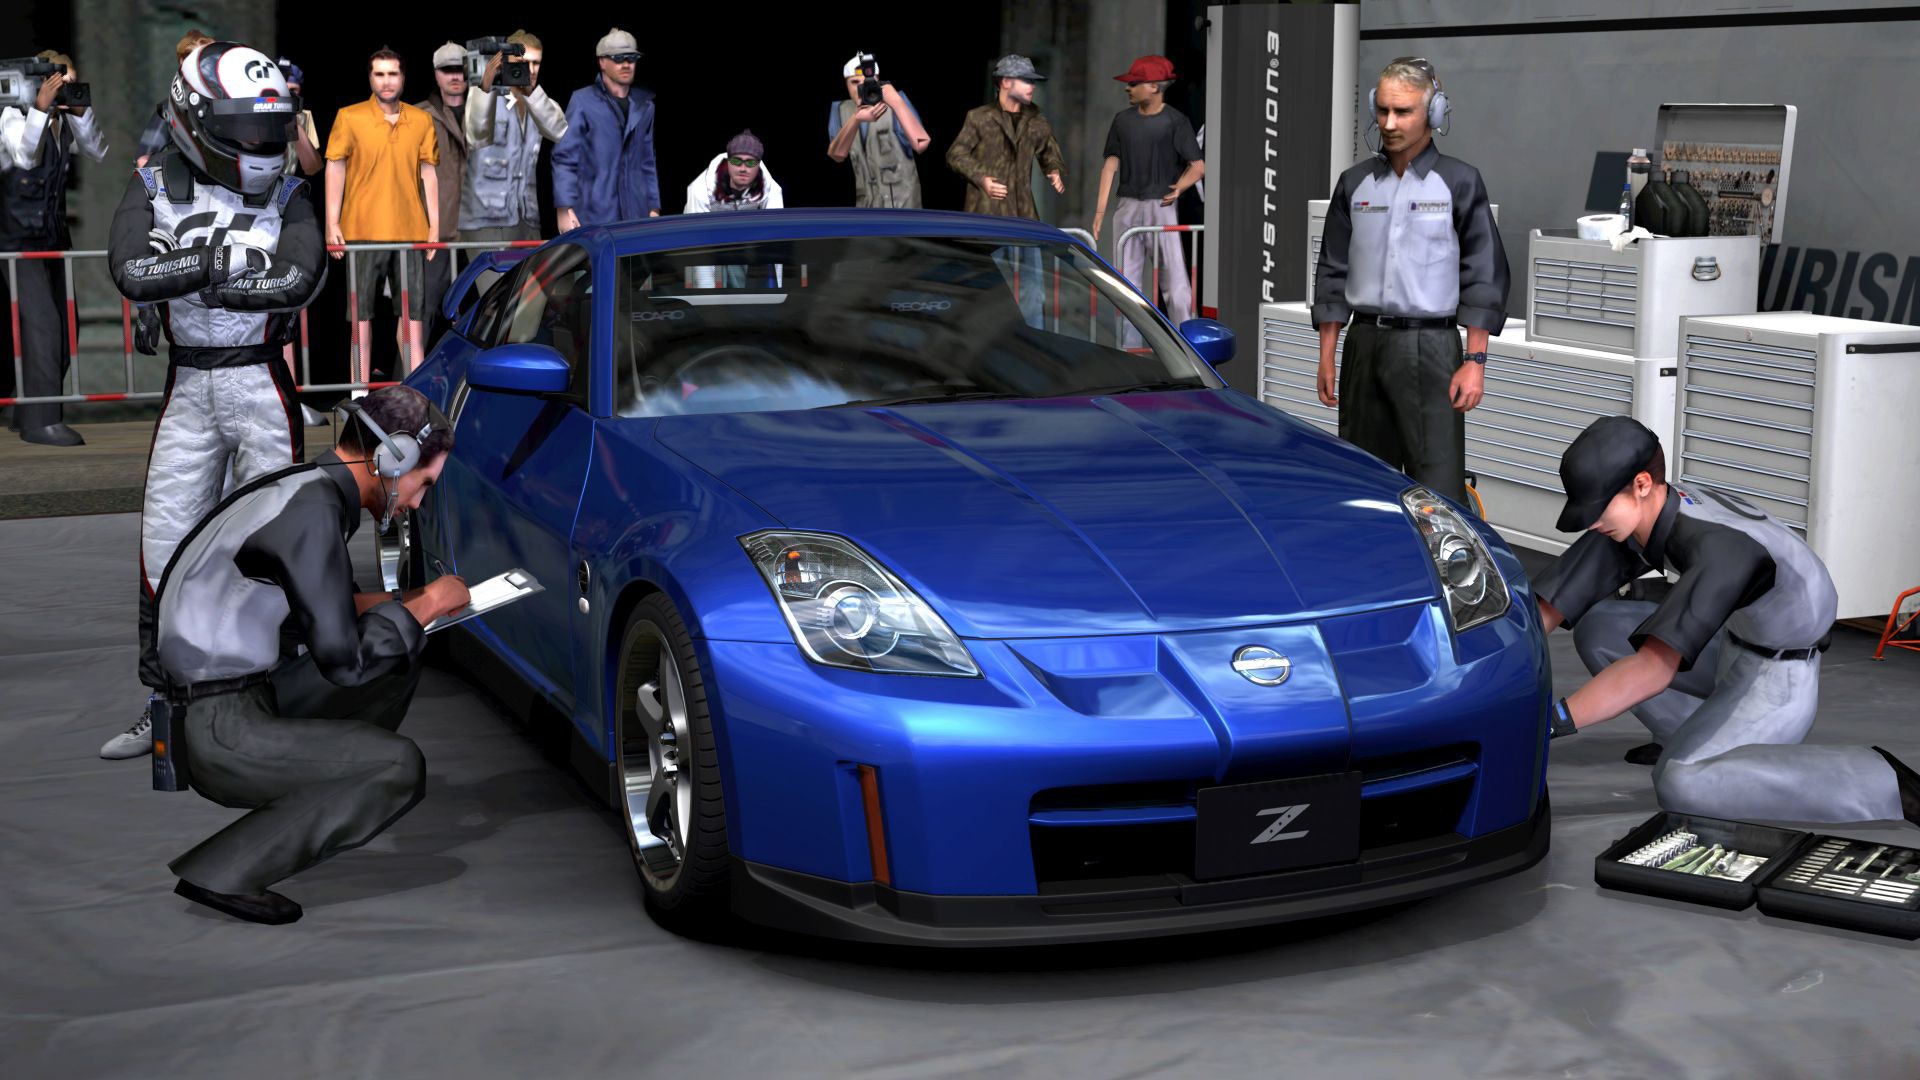 video, Games, Cars, Nissan, 350z, Gran, Turismo, 5, Playstation, 3, Pit crew Wallpaper